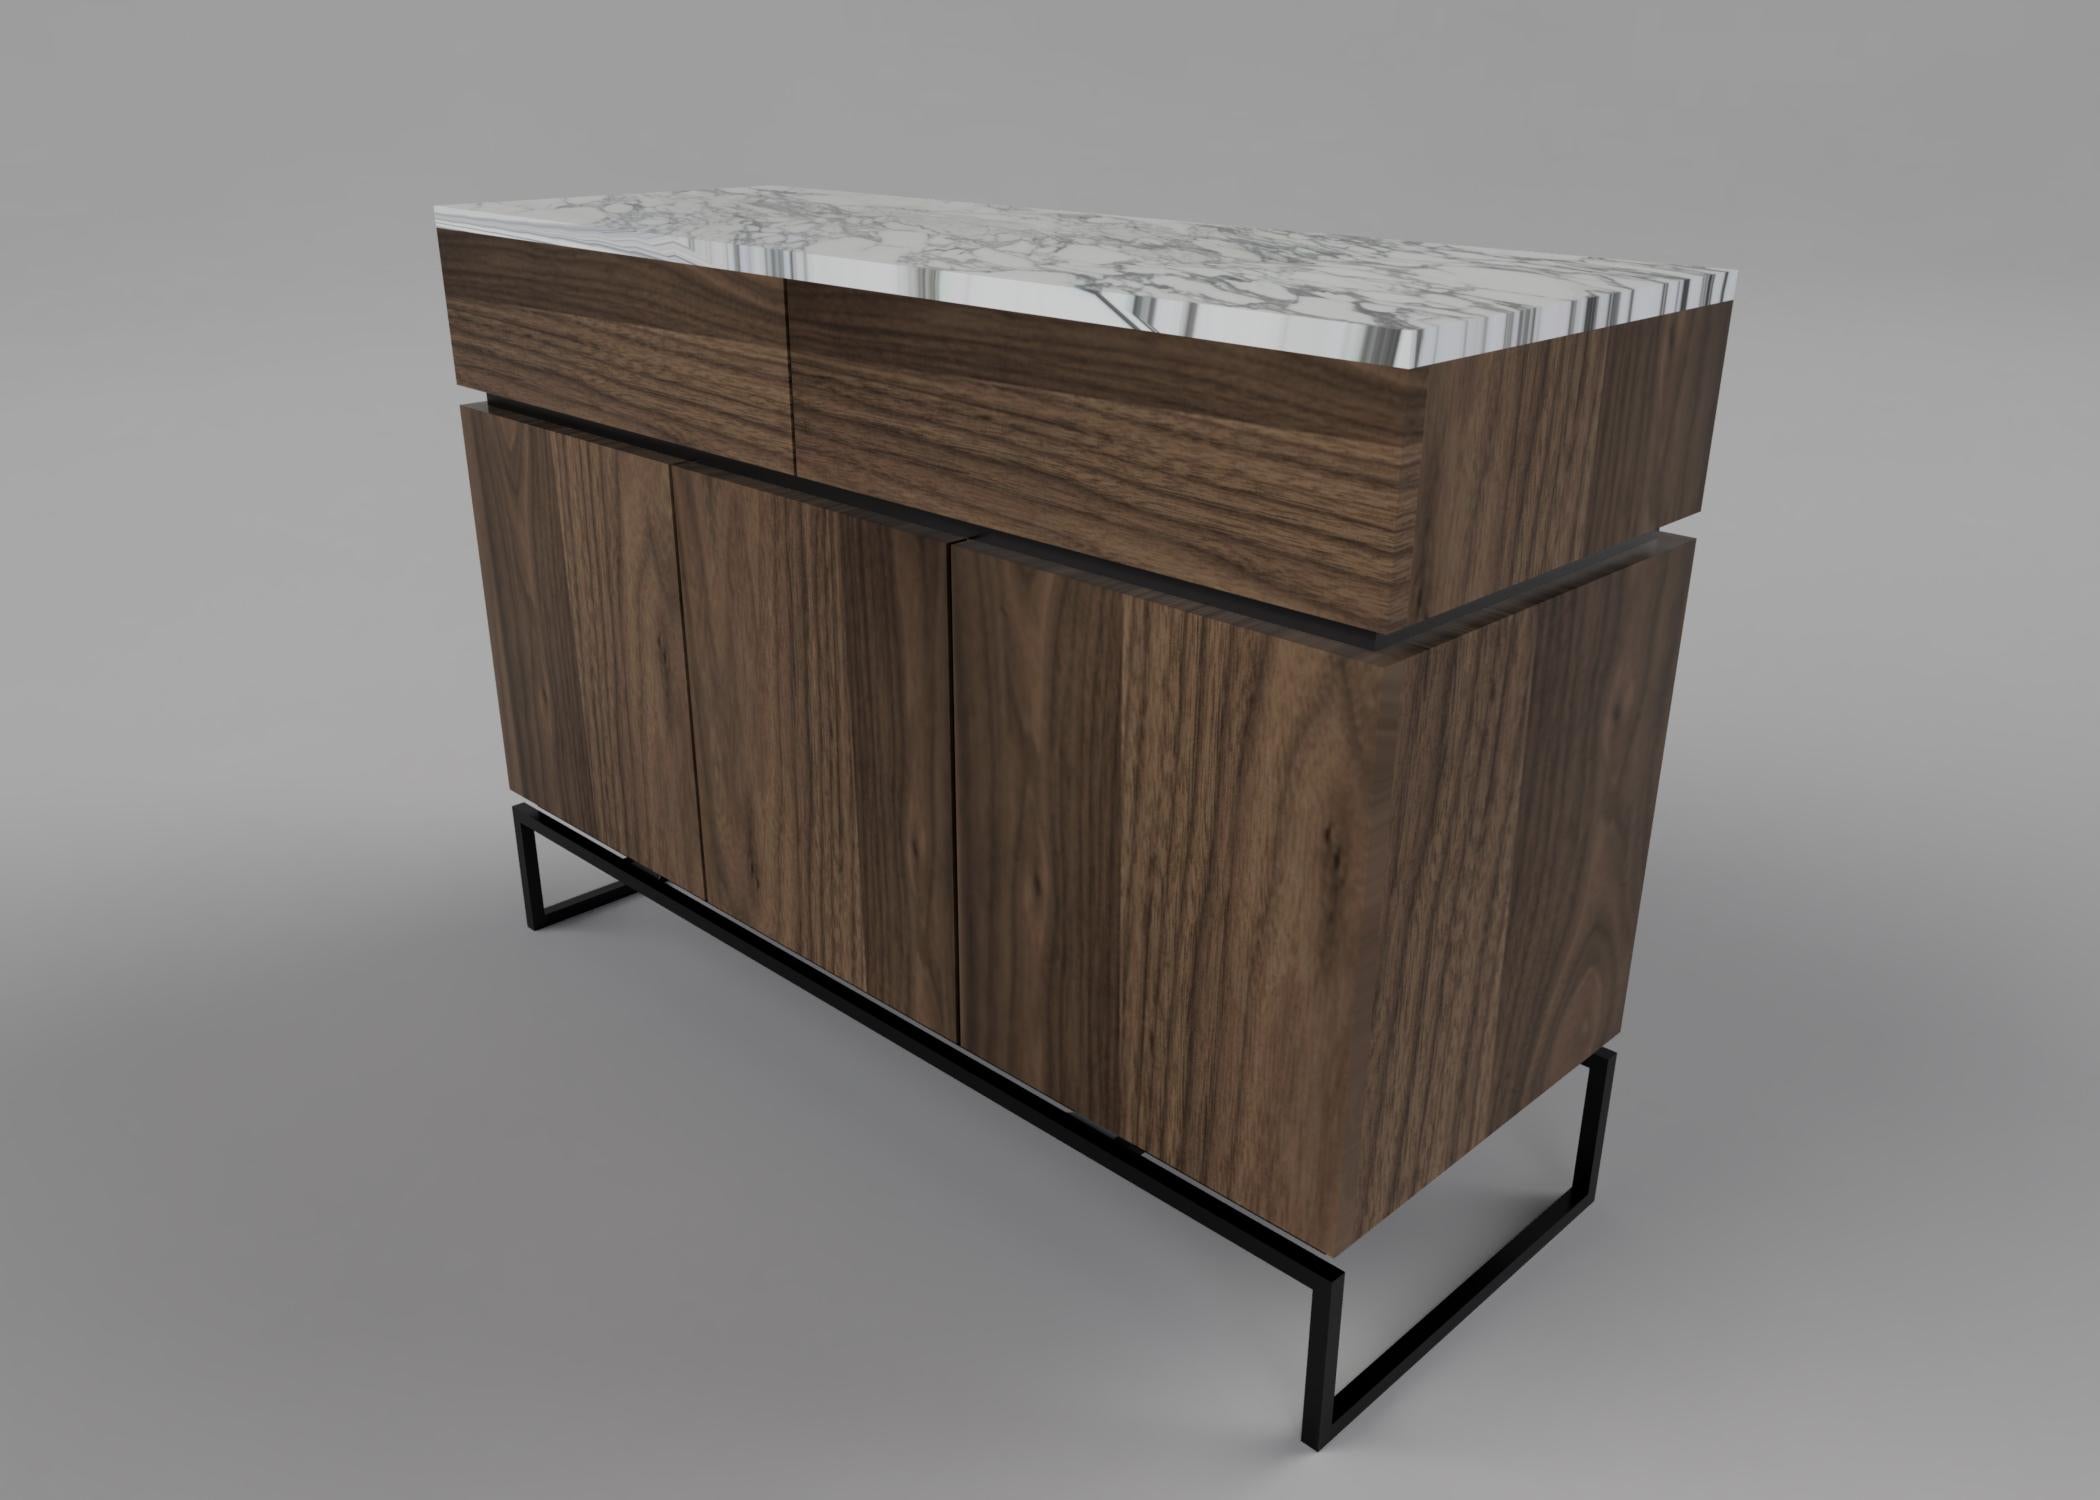 As the God of Emotions, Pelios embraced the angry, the happy, the obscured, even the somber. Consuming all of these emotions and exuding them in a sophisticated, glamorous form, the result is the Pelios console. With a timeless wood veneer